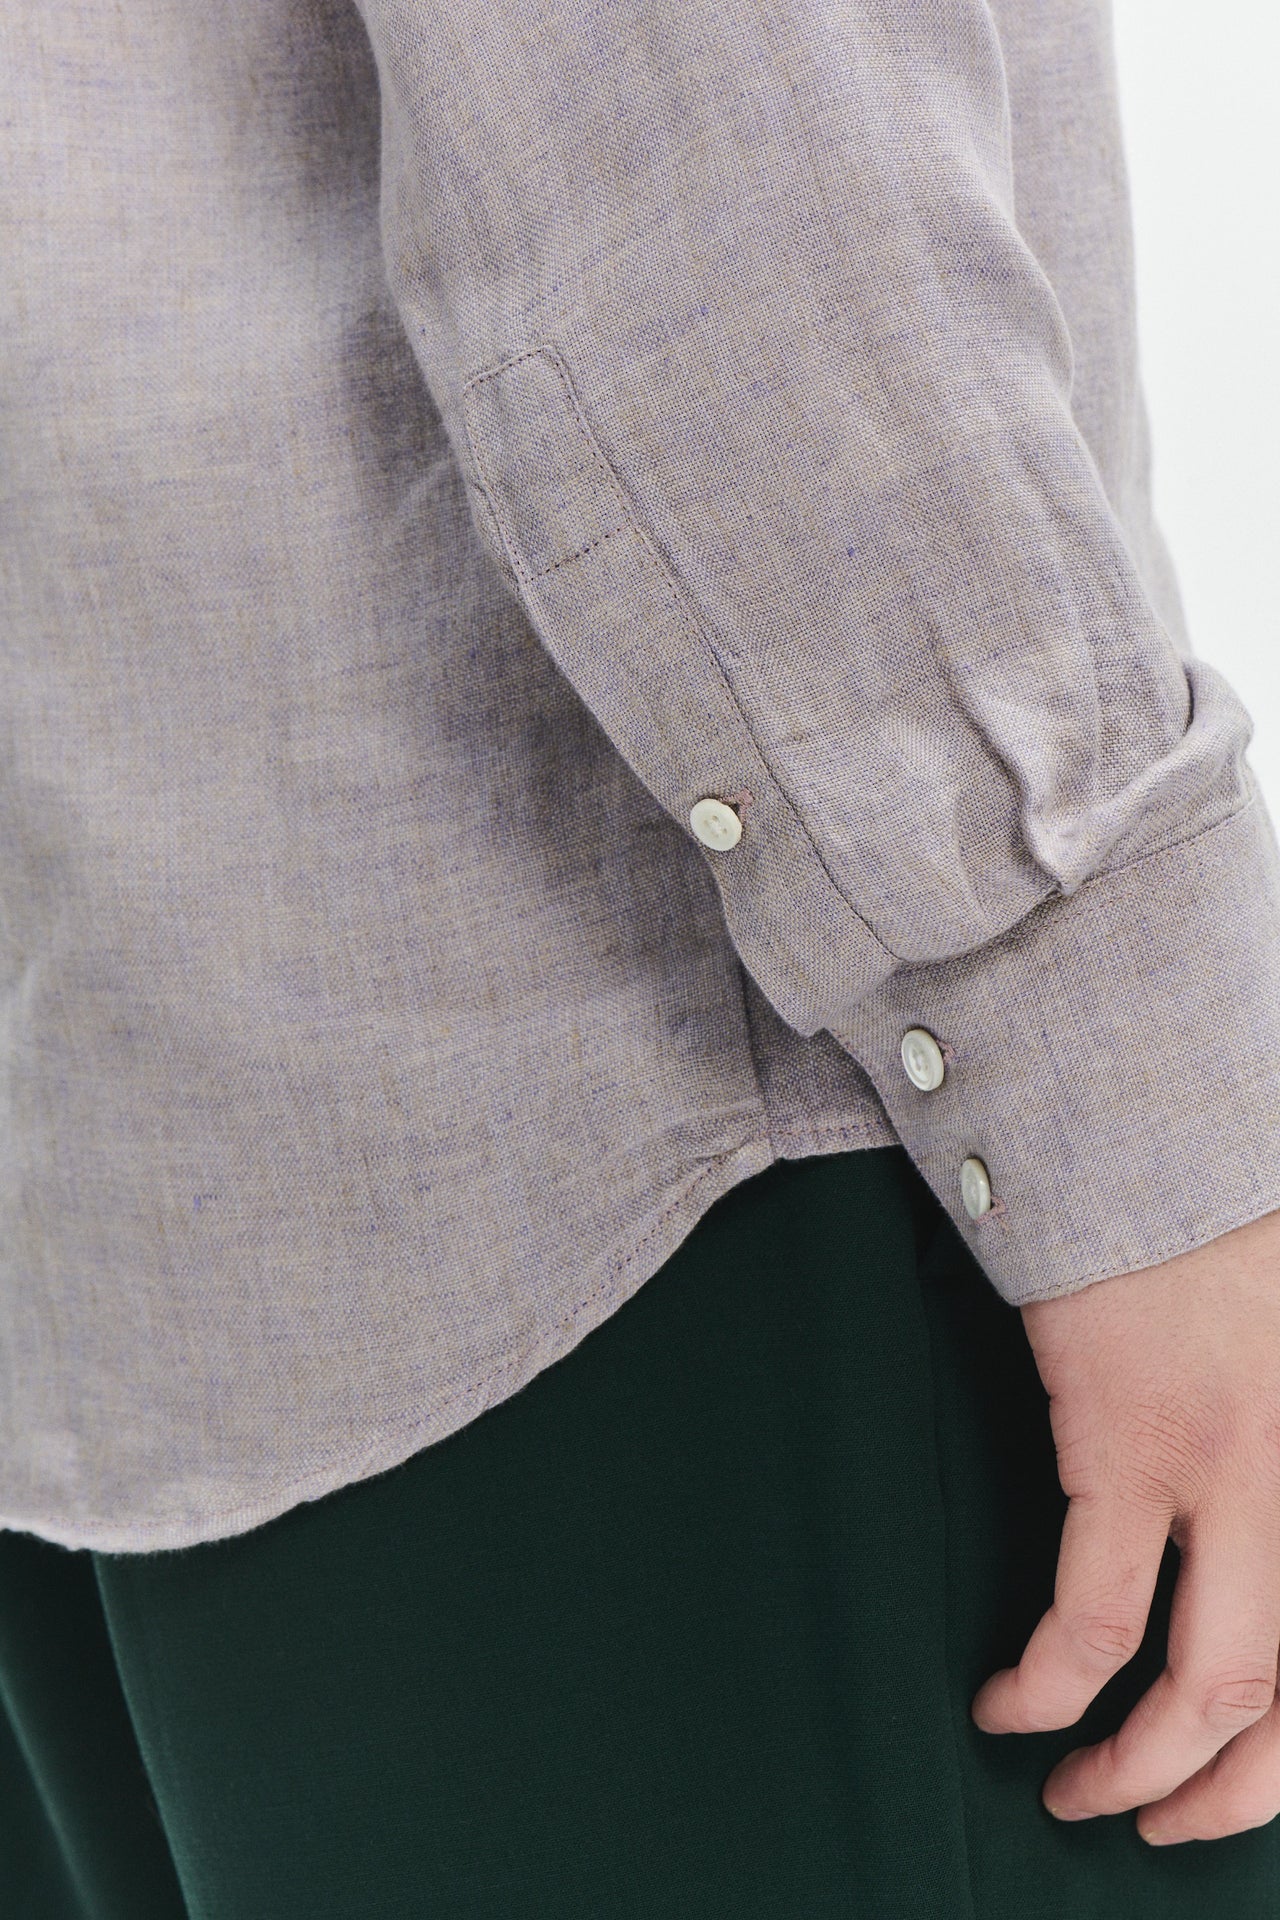 Feel Good Shirt in a Lavender Rich Structured Italian Oxford Linen